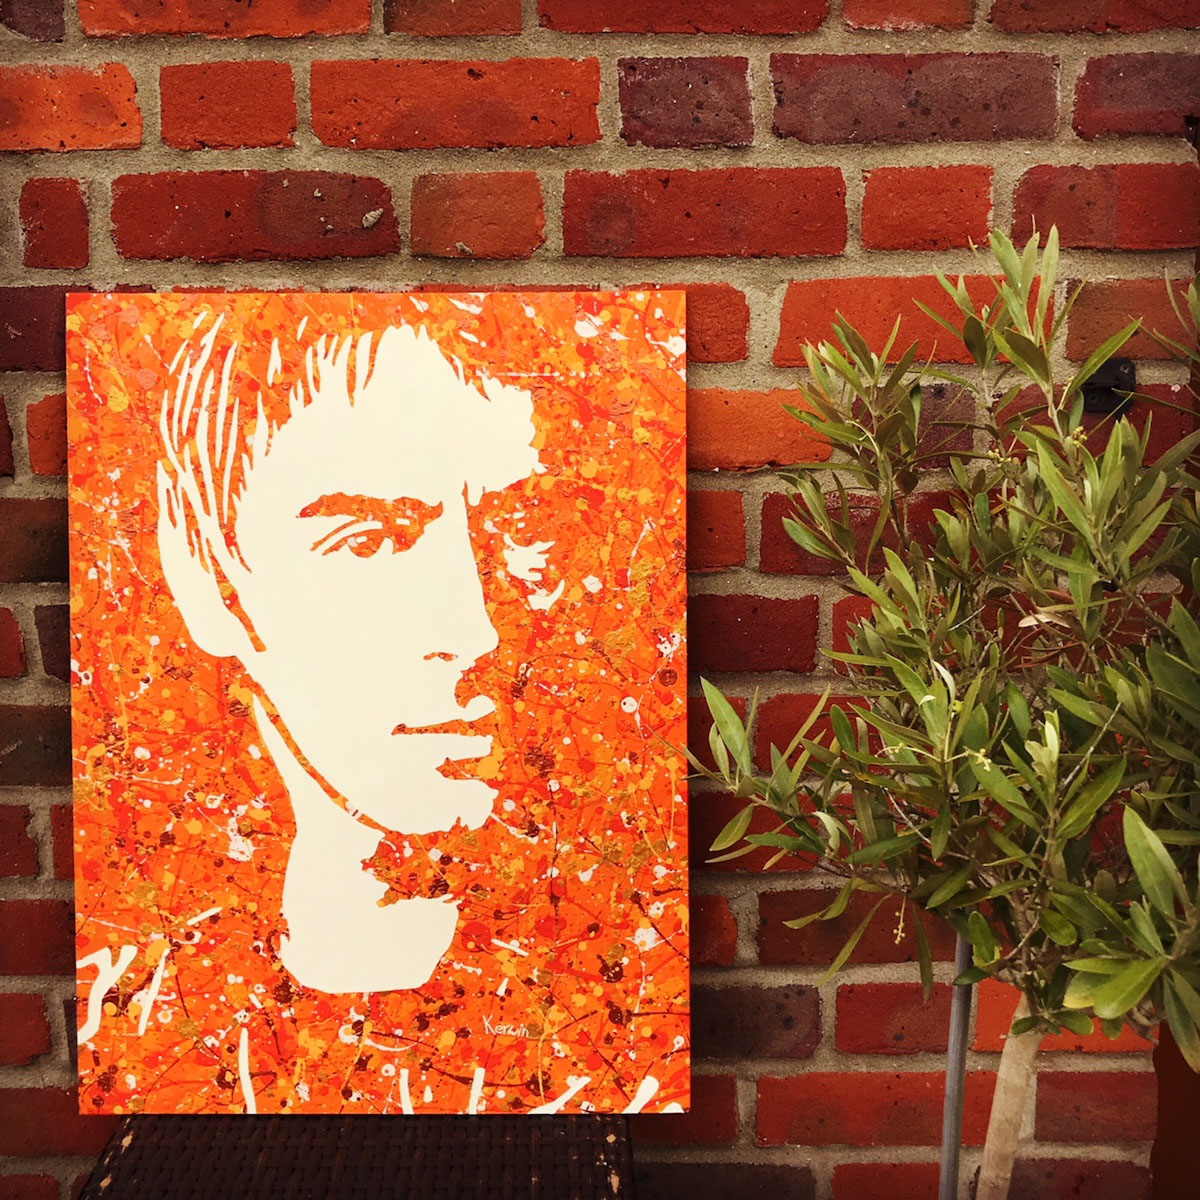 Paul Weller pop art music painting & poster prints | By Kerwin | The Jam | The Style Council